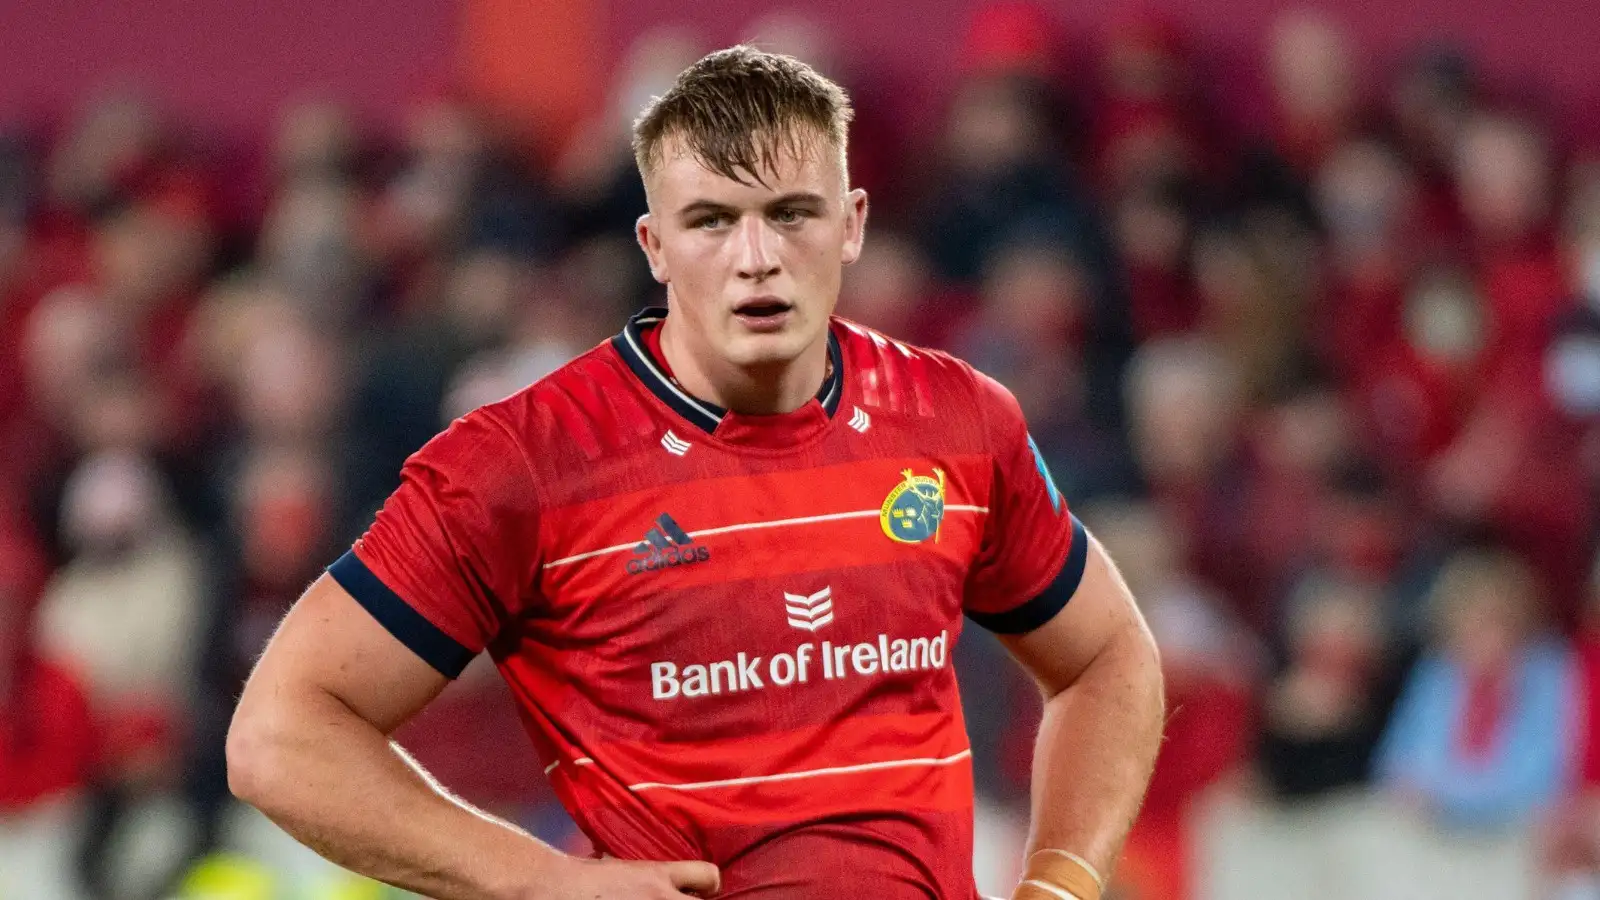 Following Friday's United Rugby Championship (URC) action, Planet Rugby picks out the standout Ireland players from the Munster and Ulster performances. 